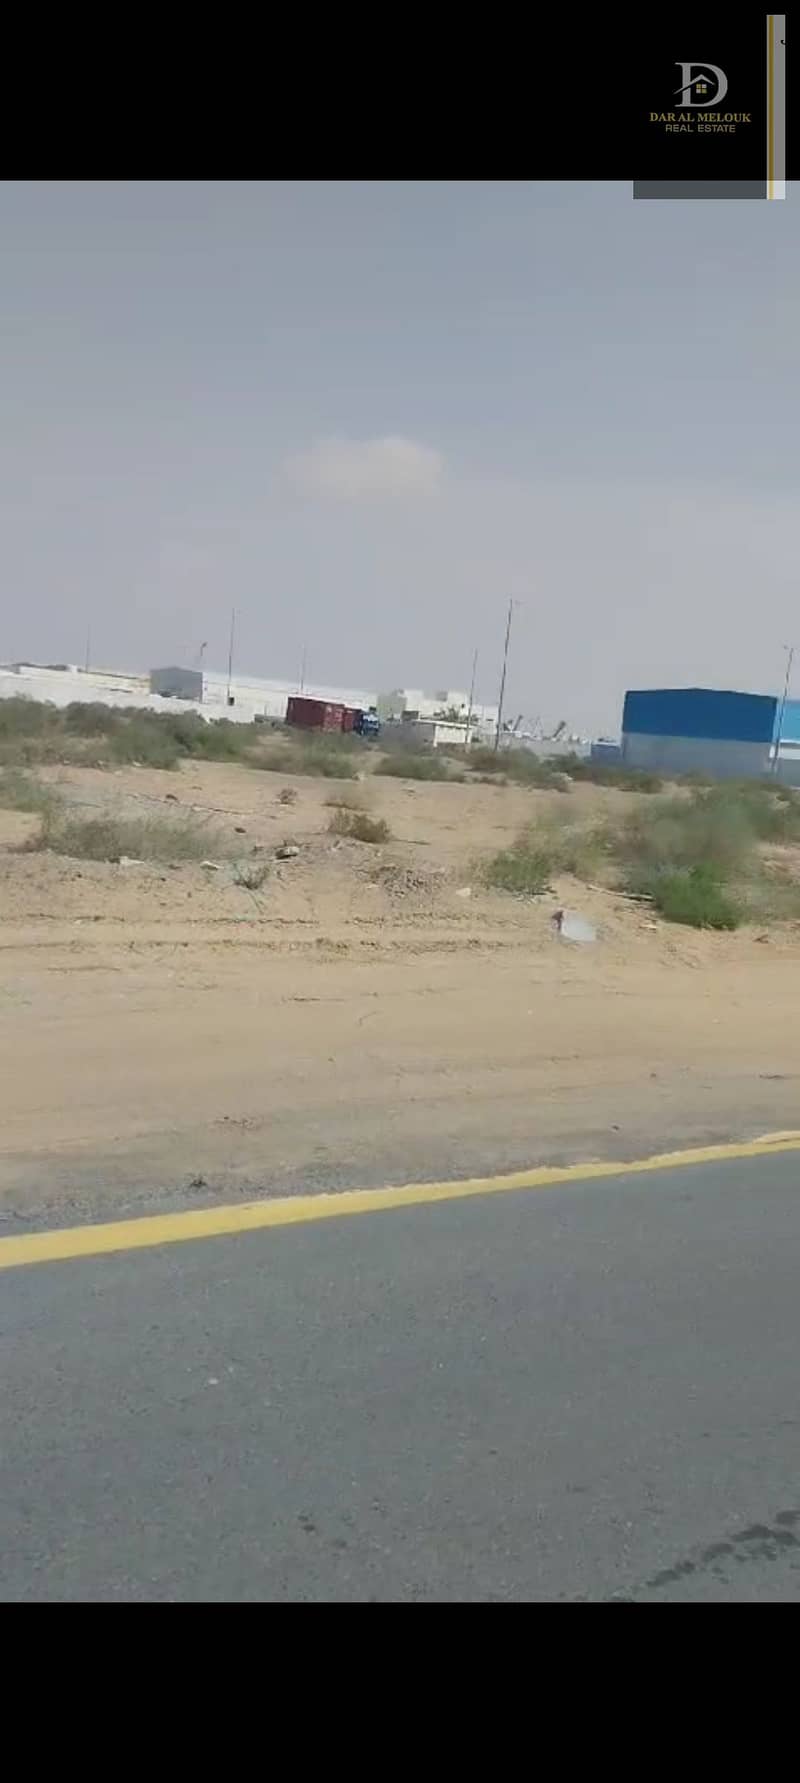 For sale in Sharjah    Basateen Al-Zubair area    Plots of residential and investment land